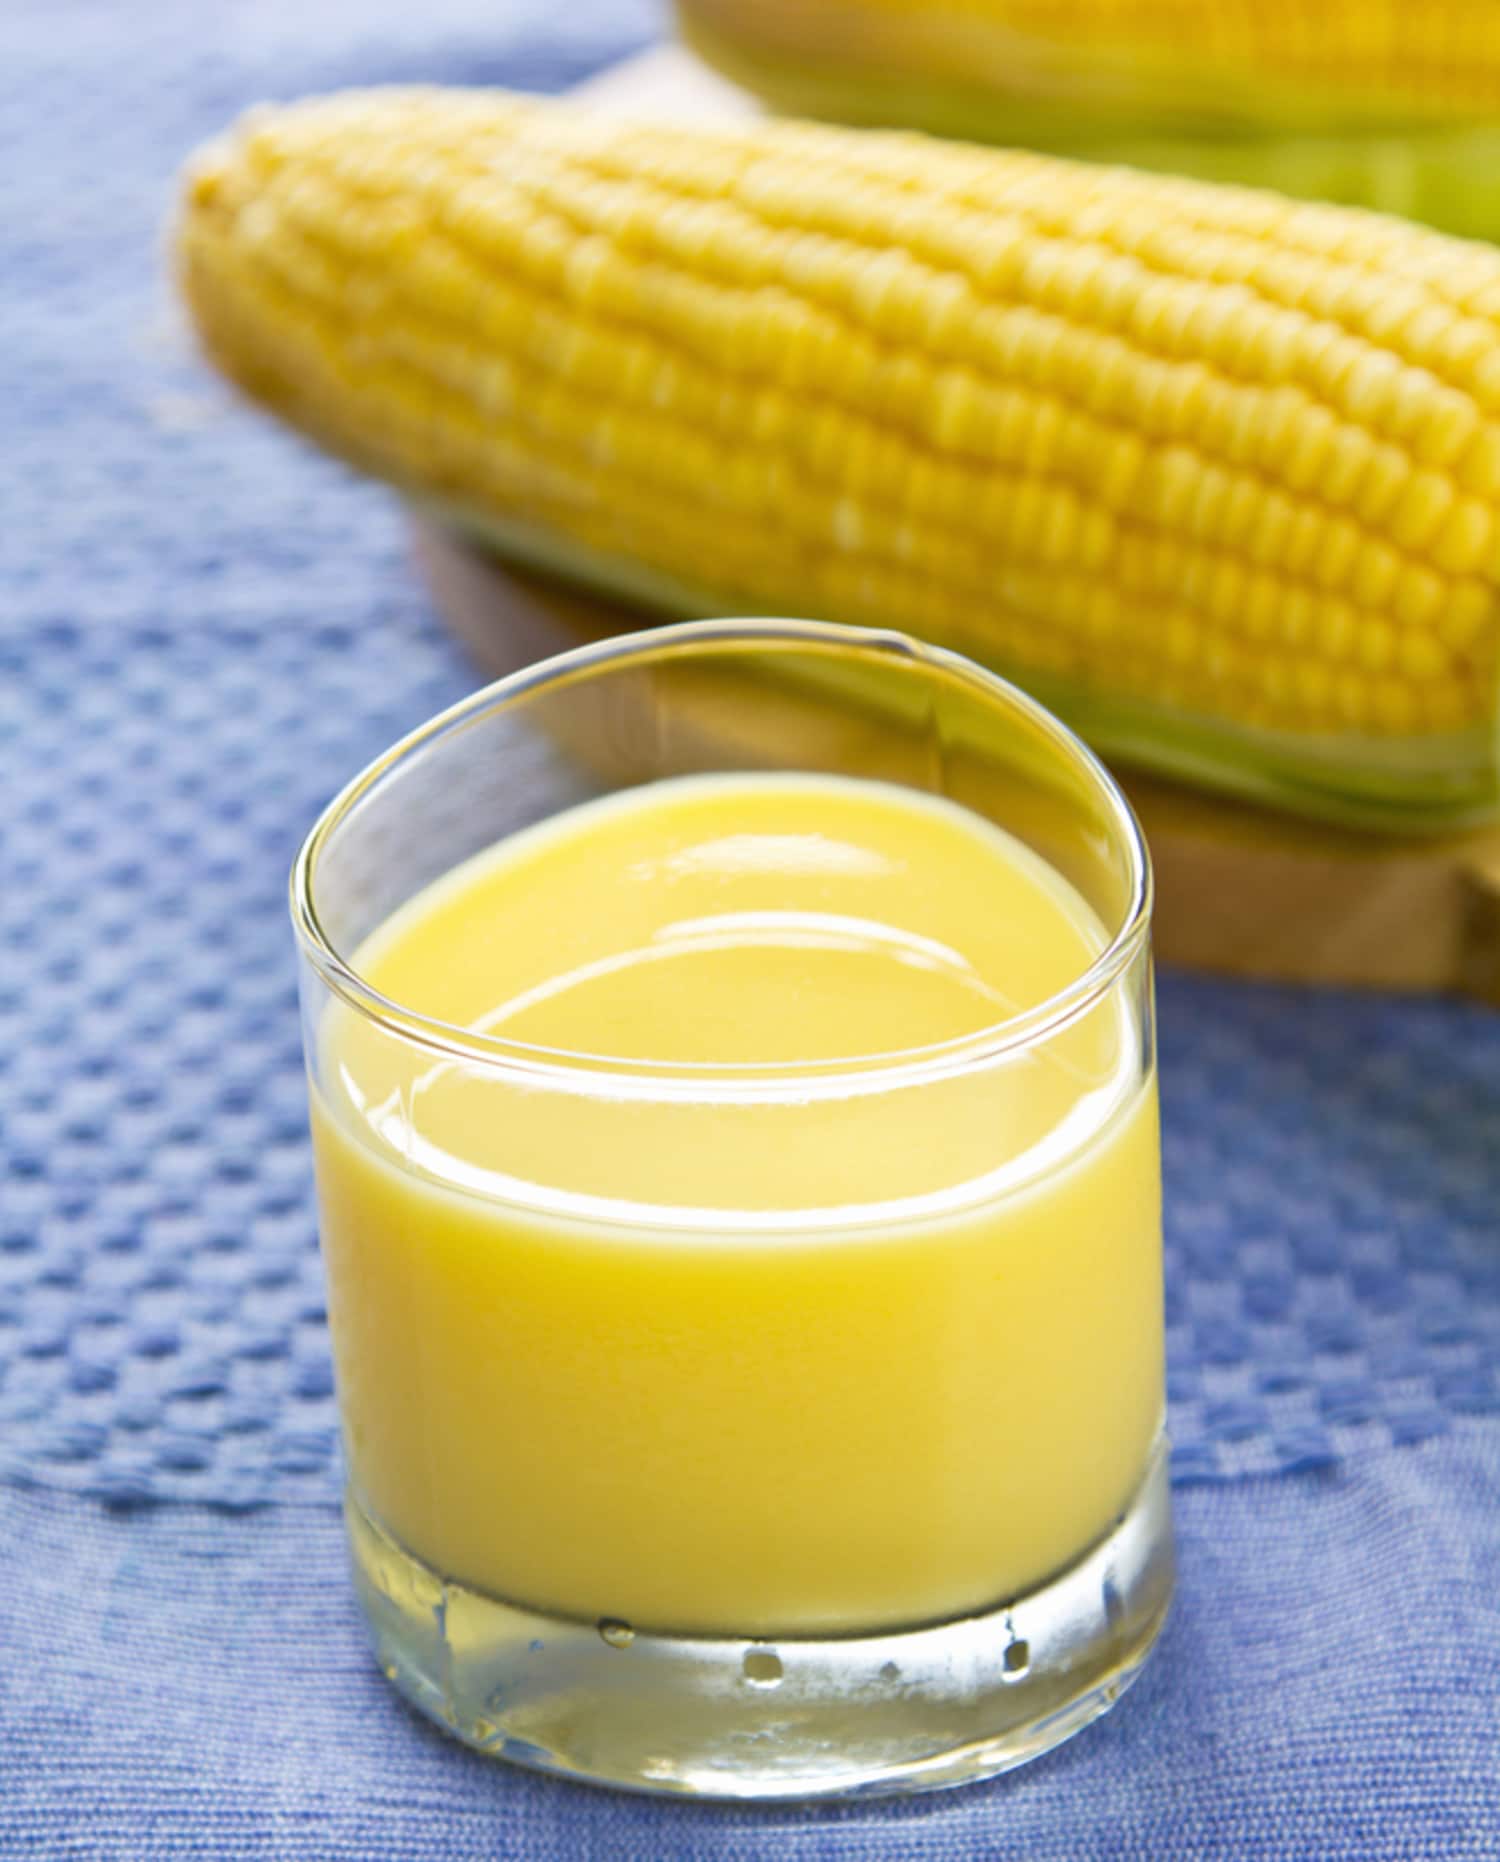 is canned corn juice good for you